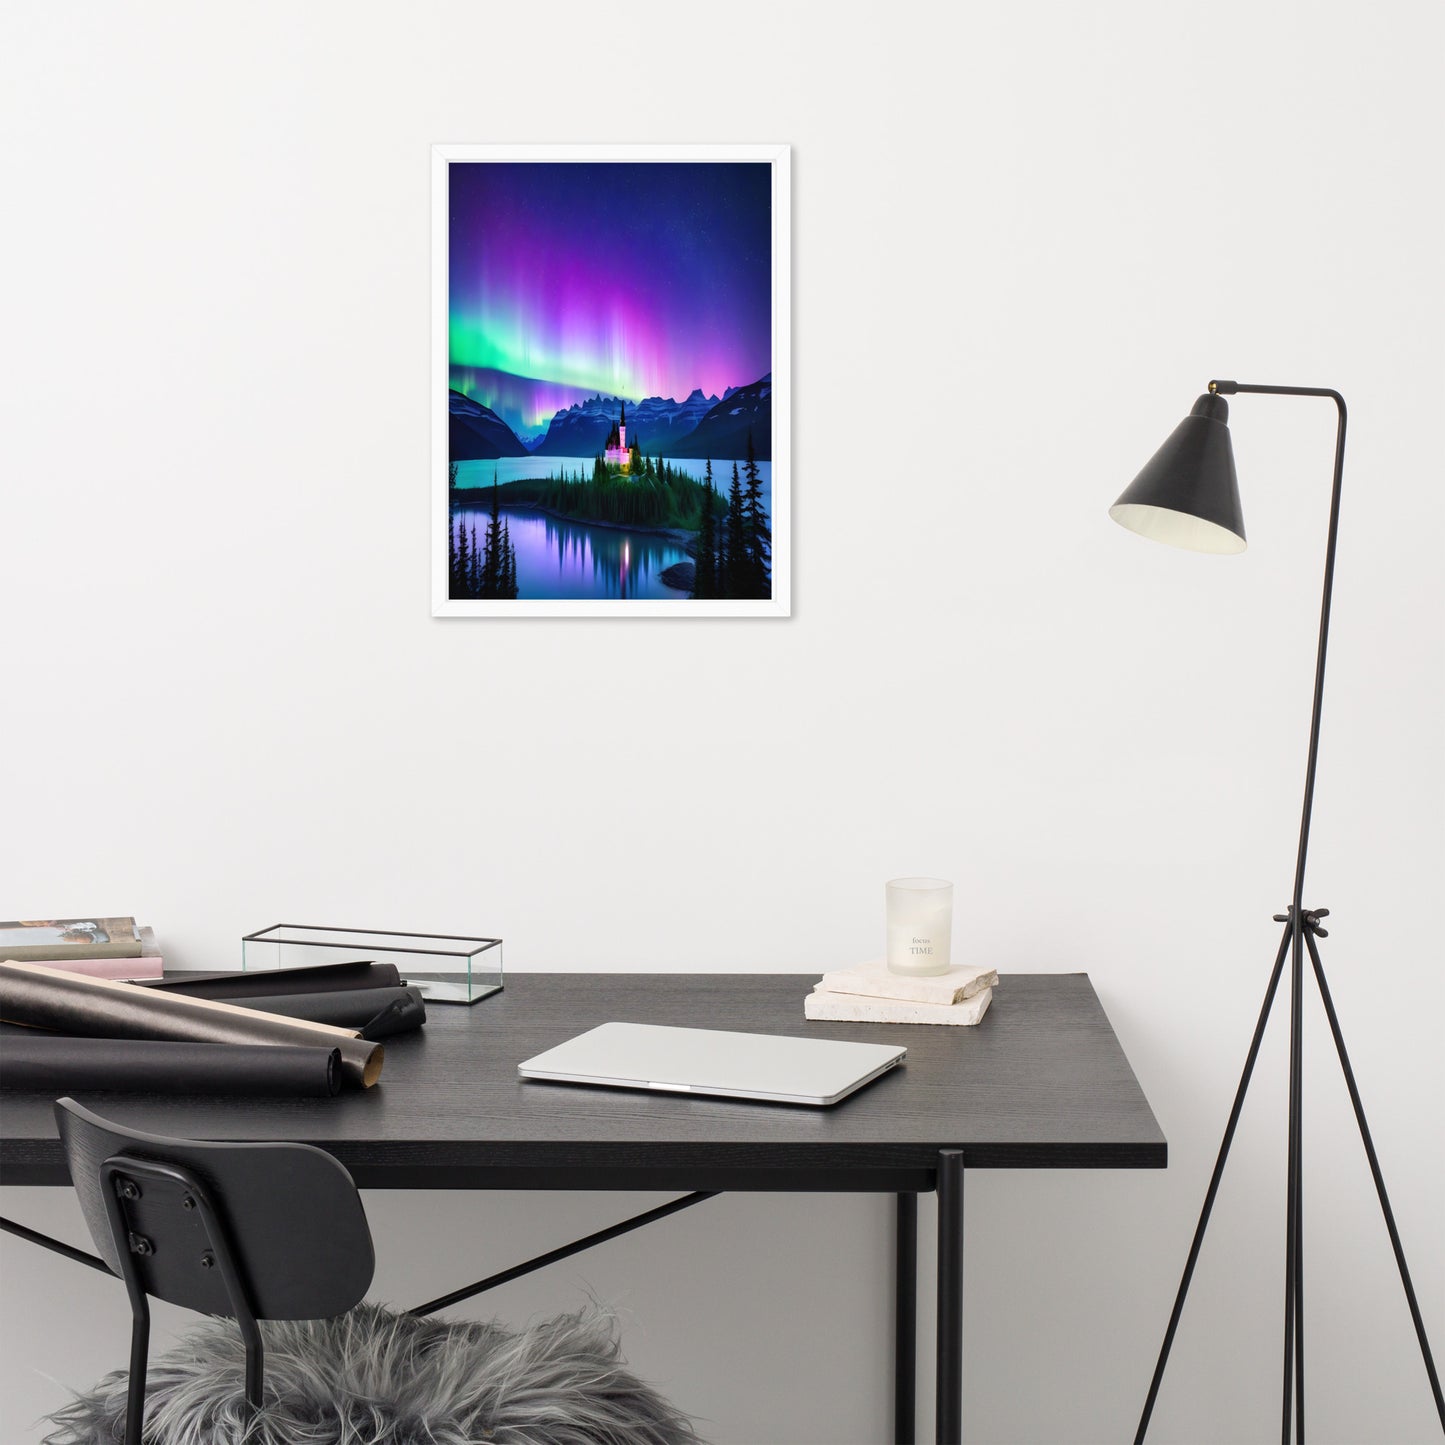 Enchanting Aurora Borealis Framed Posters - Multi Size Personalized Northern Light View - Modern Wall Art - Perfect Aurora Lovers Gift 26